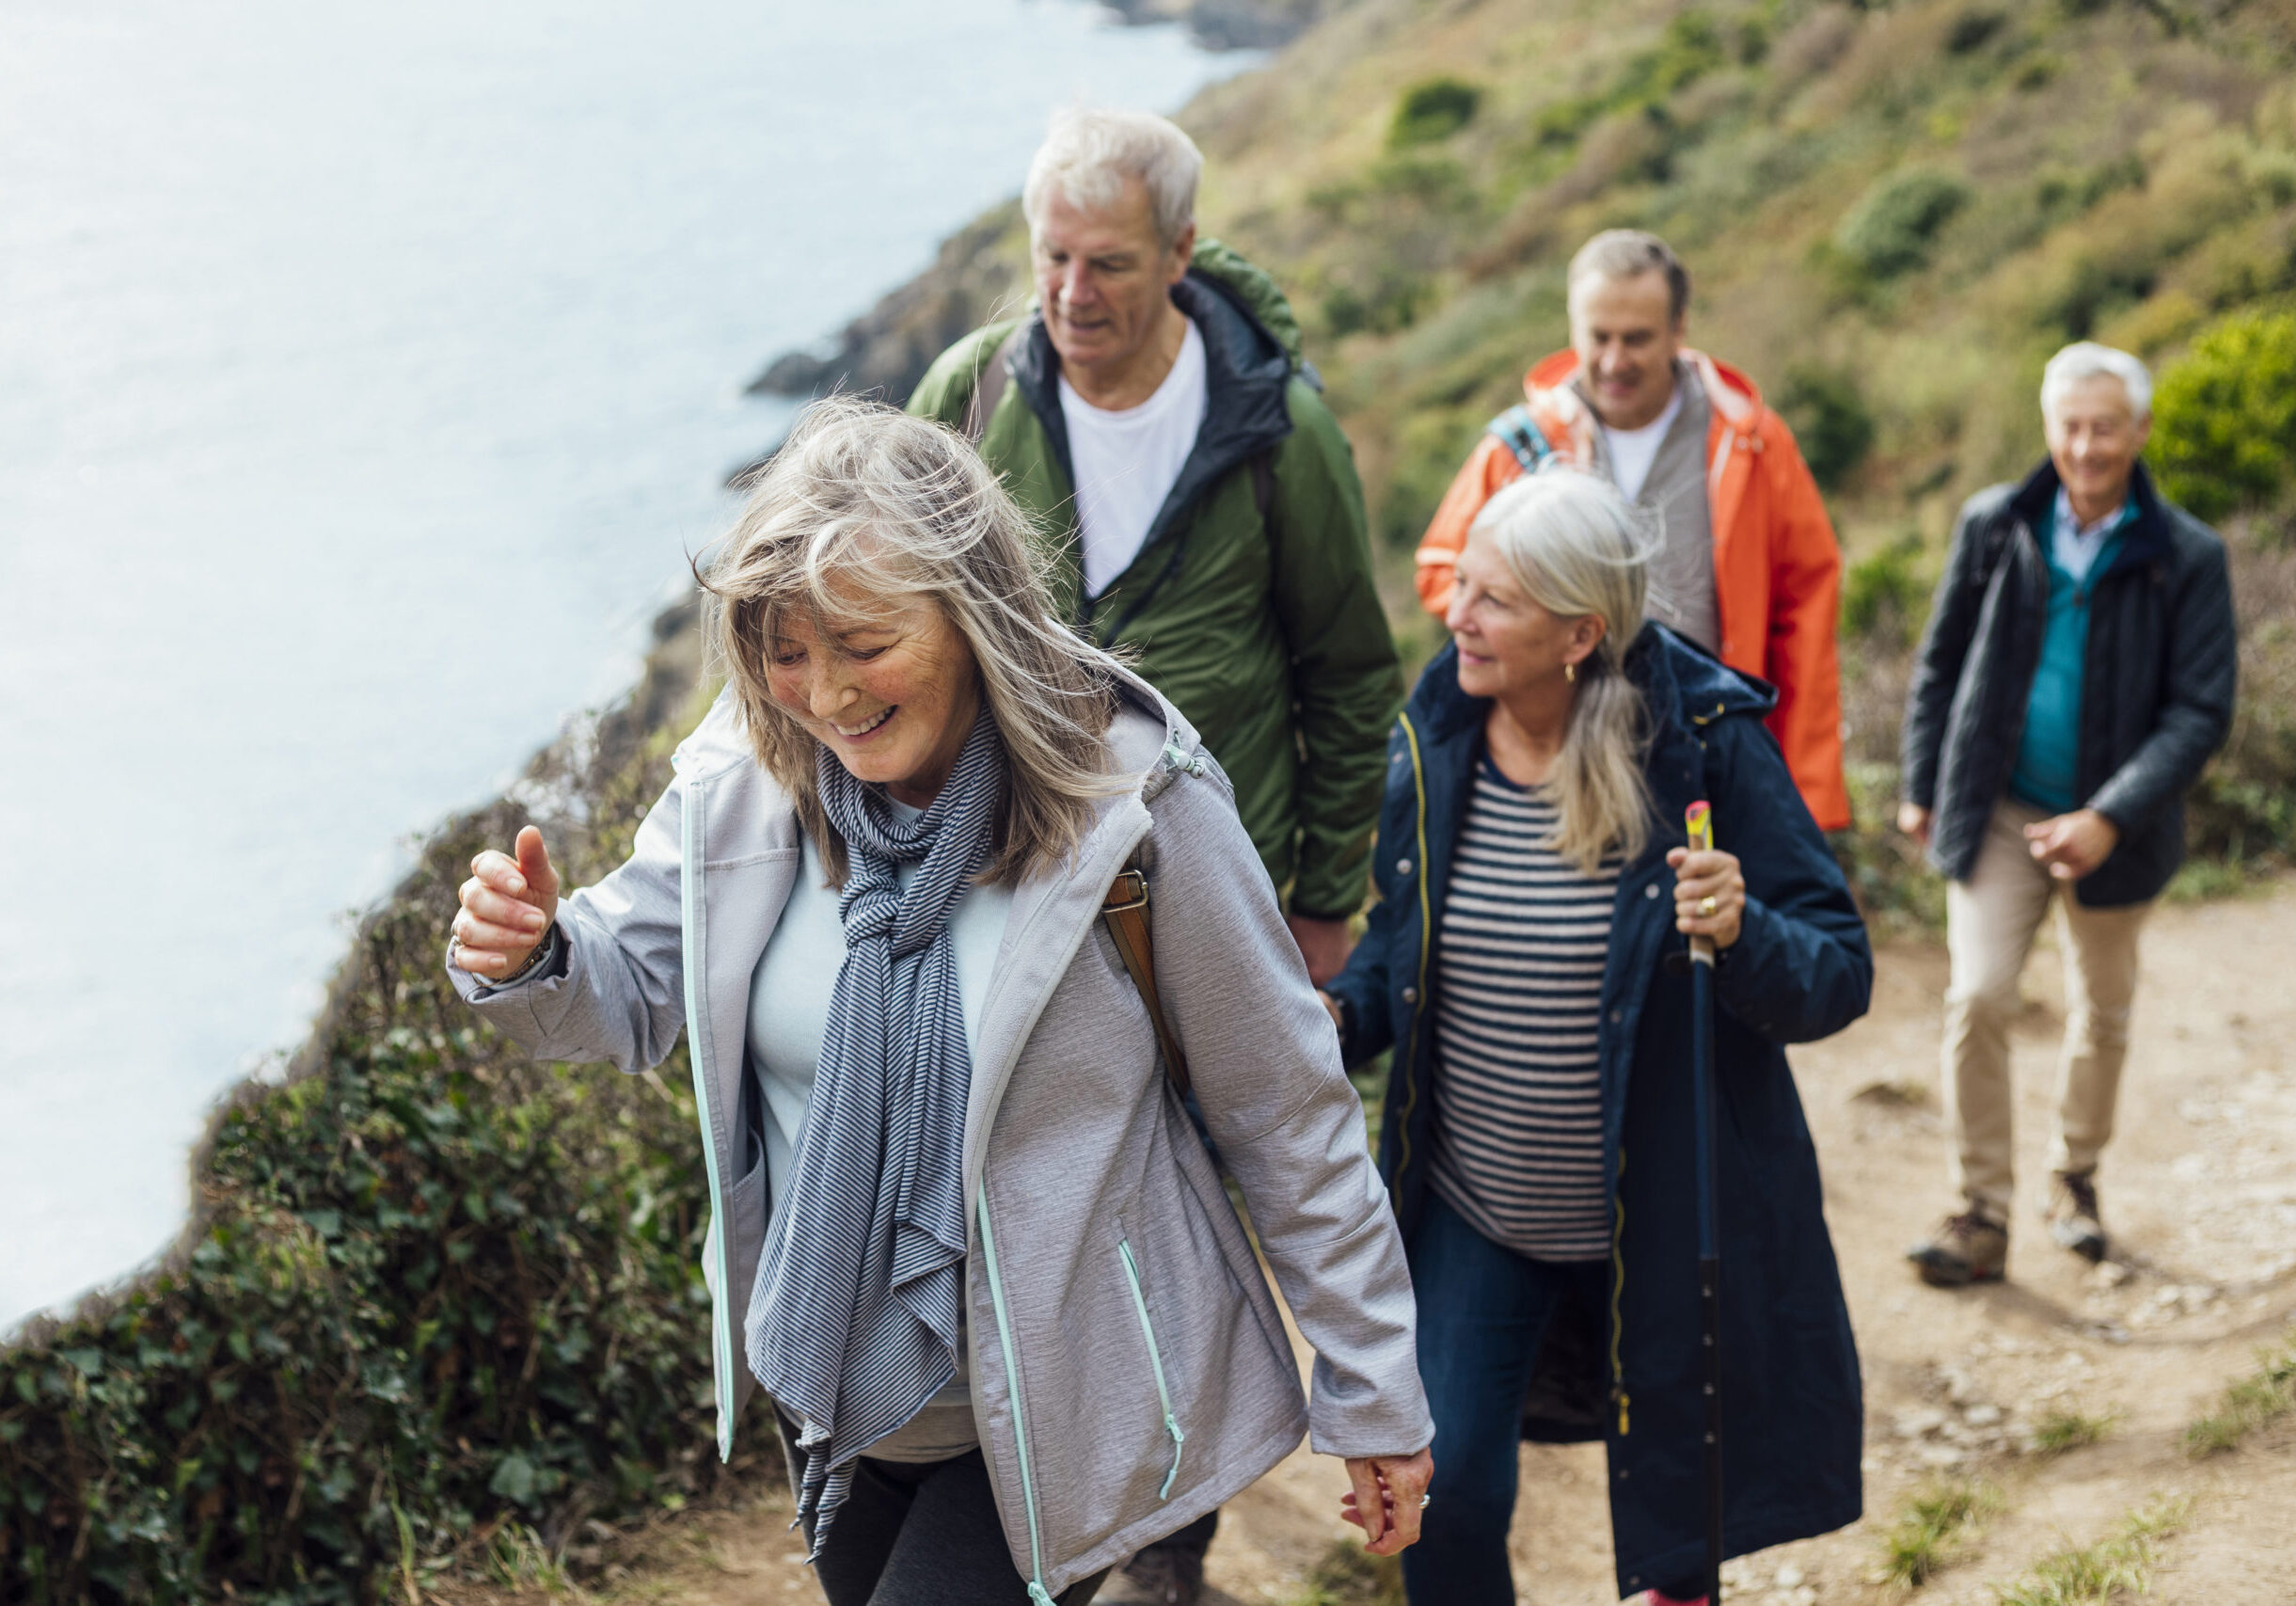 A group of male and female friends walking up a hill on a coastal path along a cliff edge overlooking the sea in Cornwall. The main focus is one woman wearing a jacket and scarf, she is smiling while looking down.